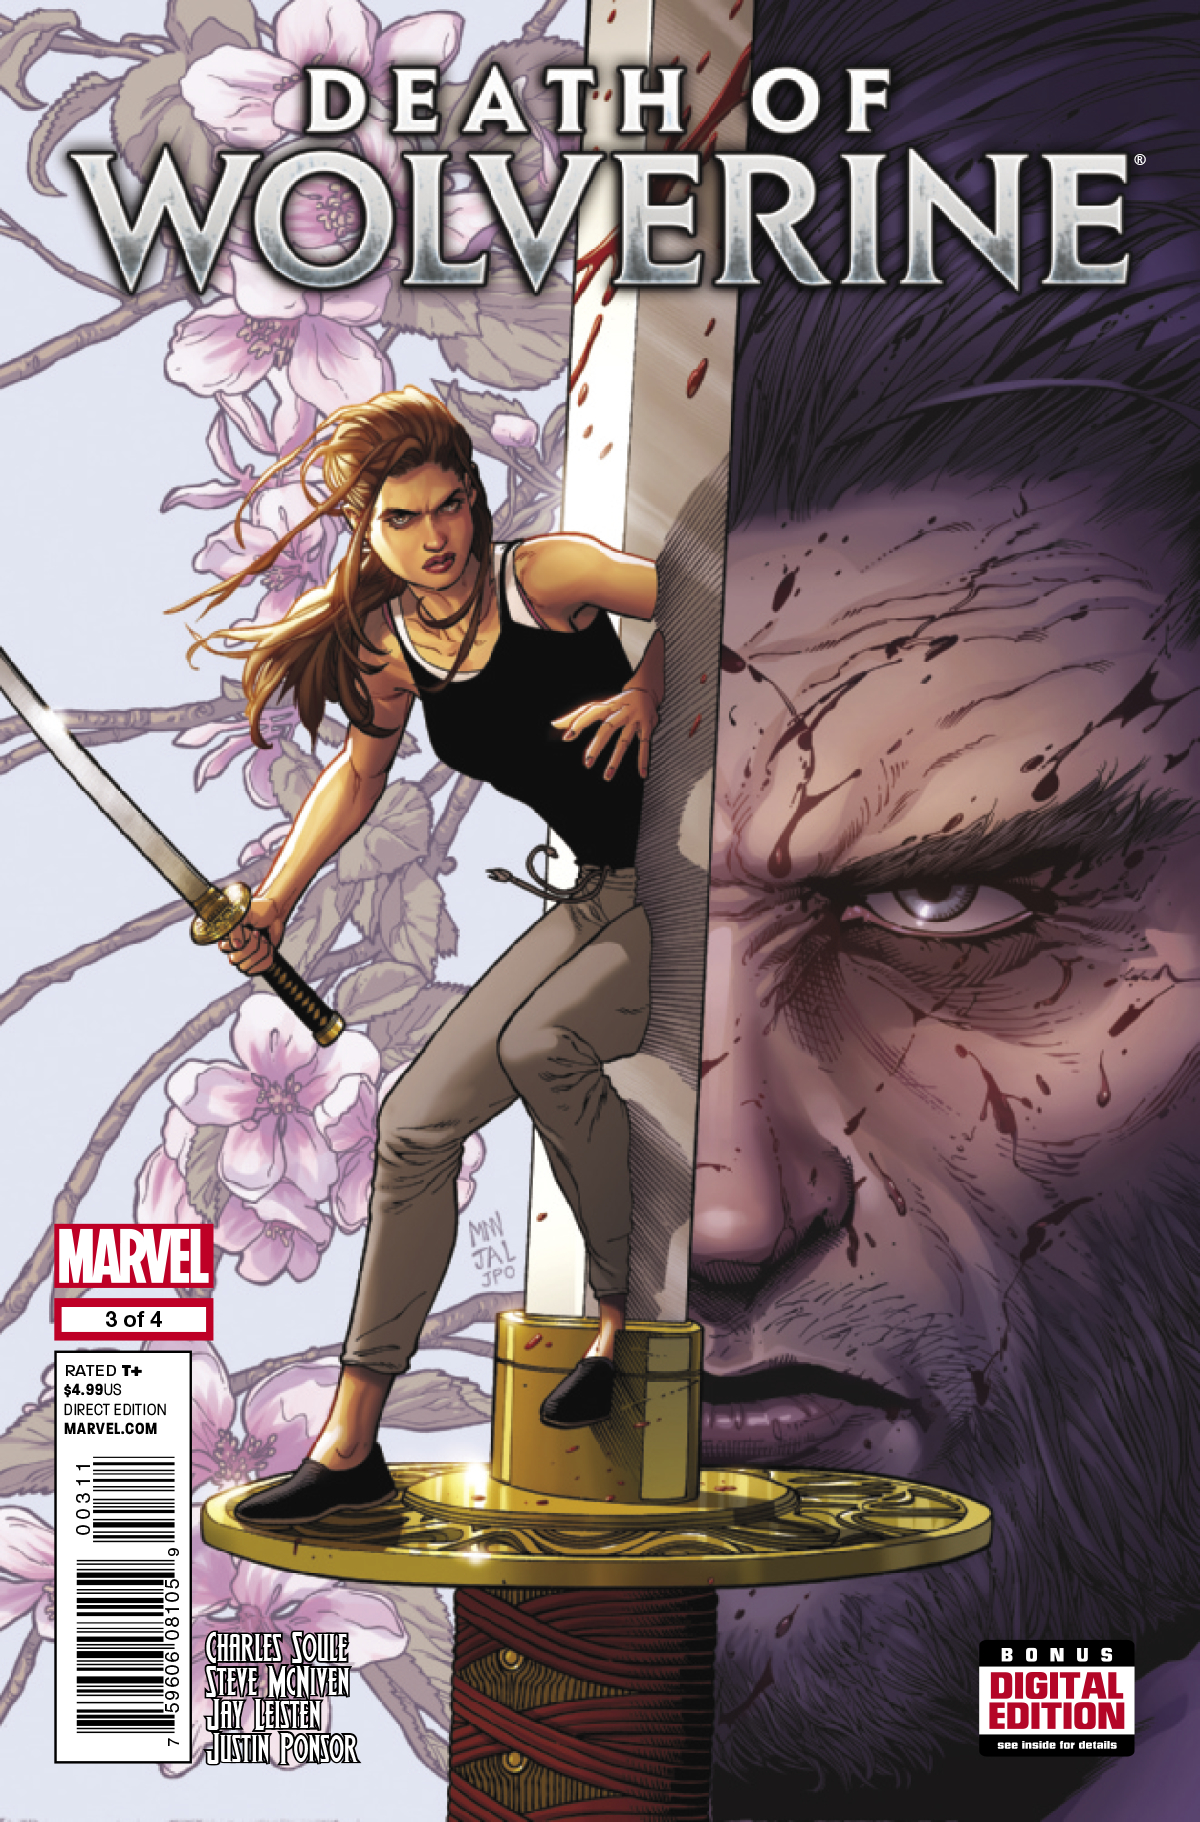 DEATH OF WOLVERINE #3 (OF 4)